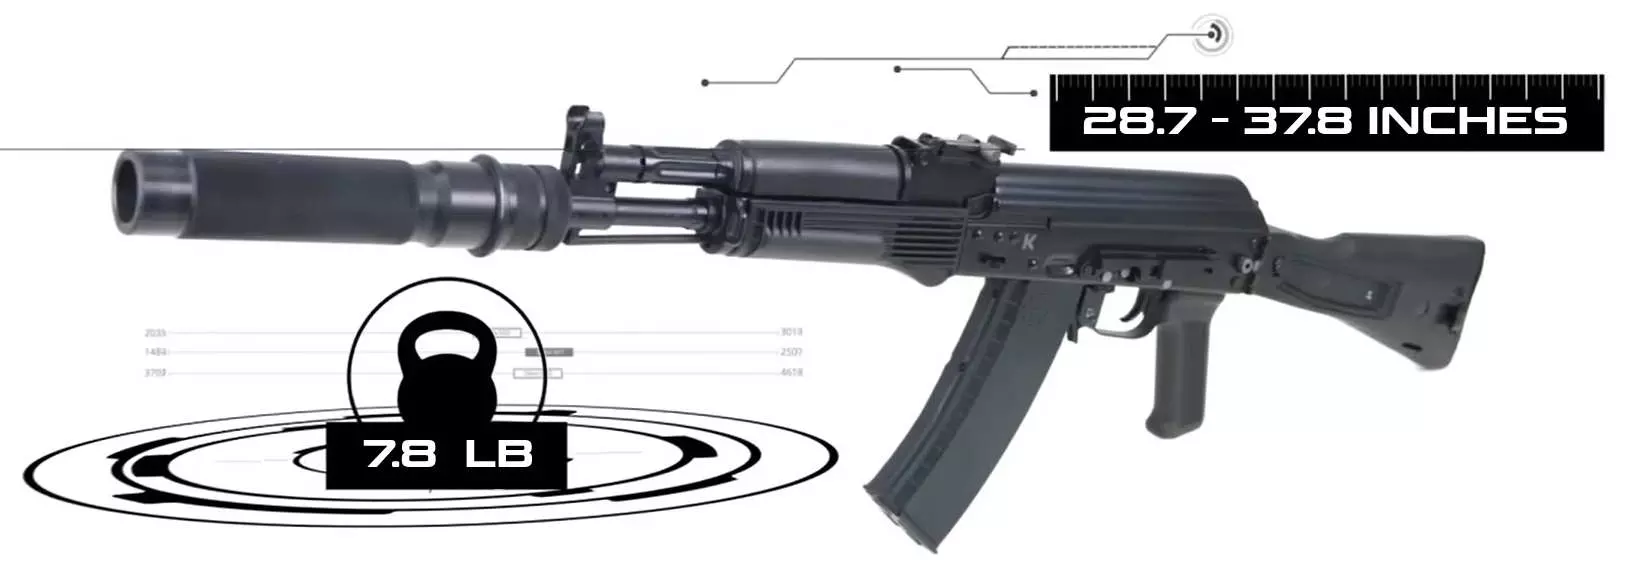 AK laser tag rifle size and weight